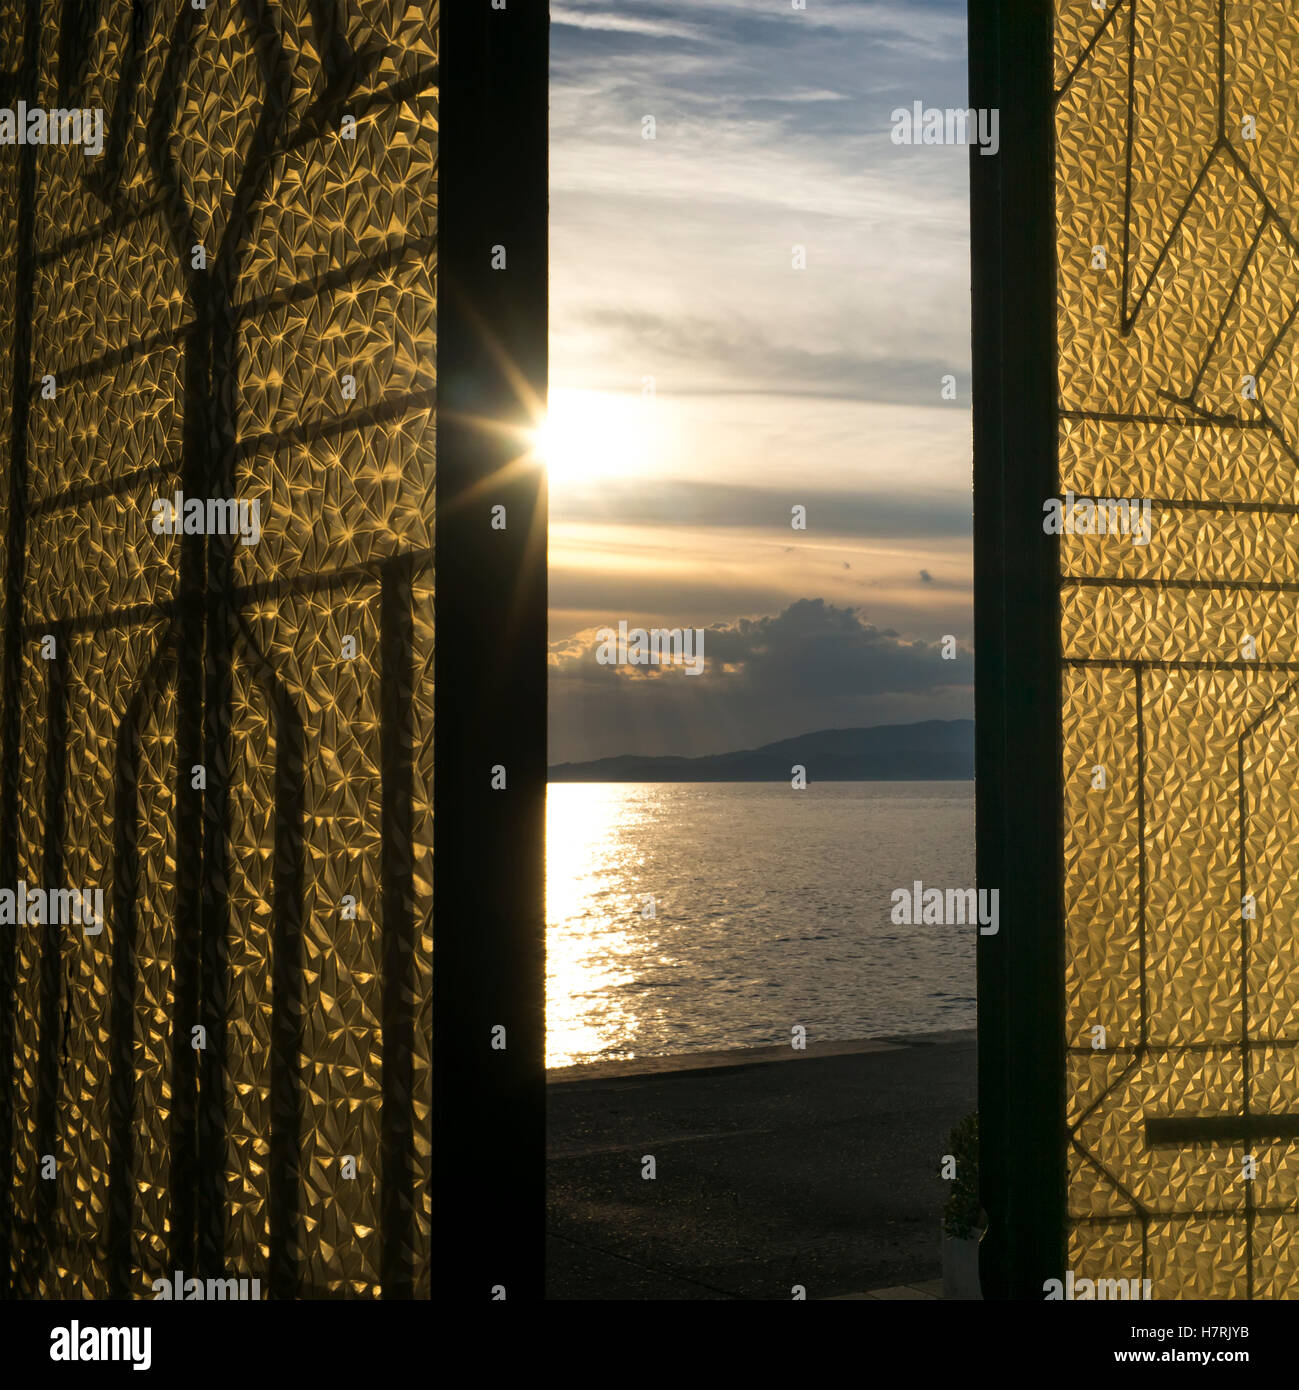 Sunlight glowing at sunset and reflected in the tranquil ocean water as viewed through a window with gold and black shutters Stock Photo